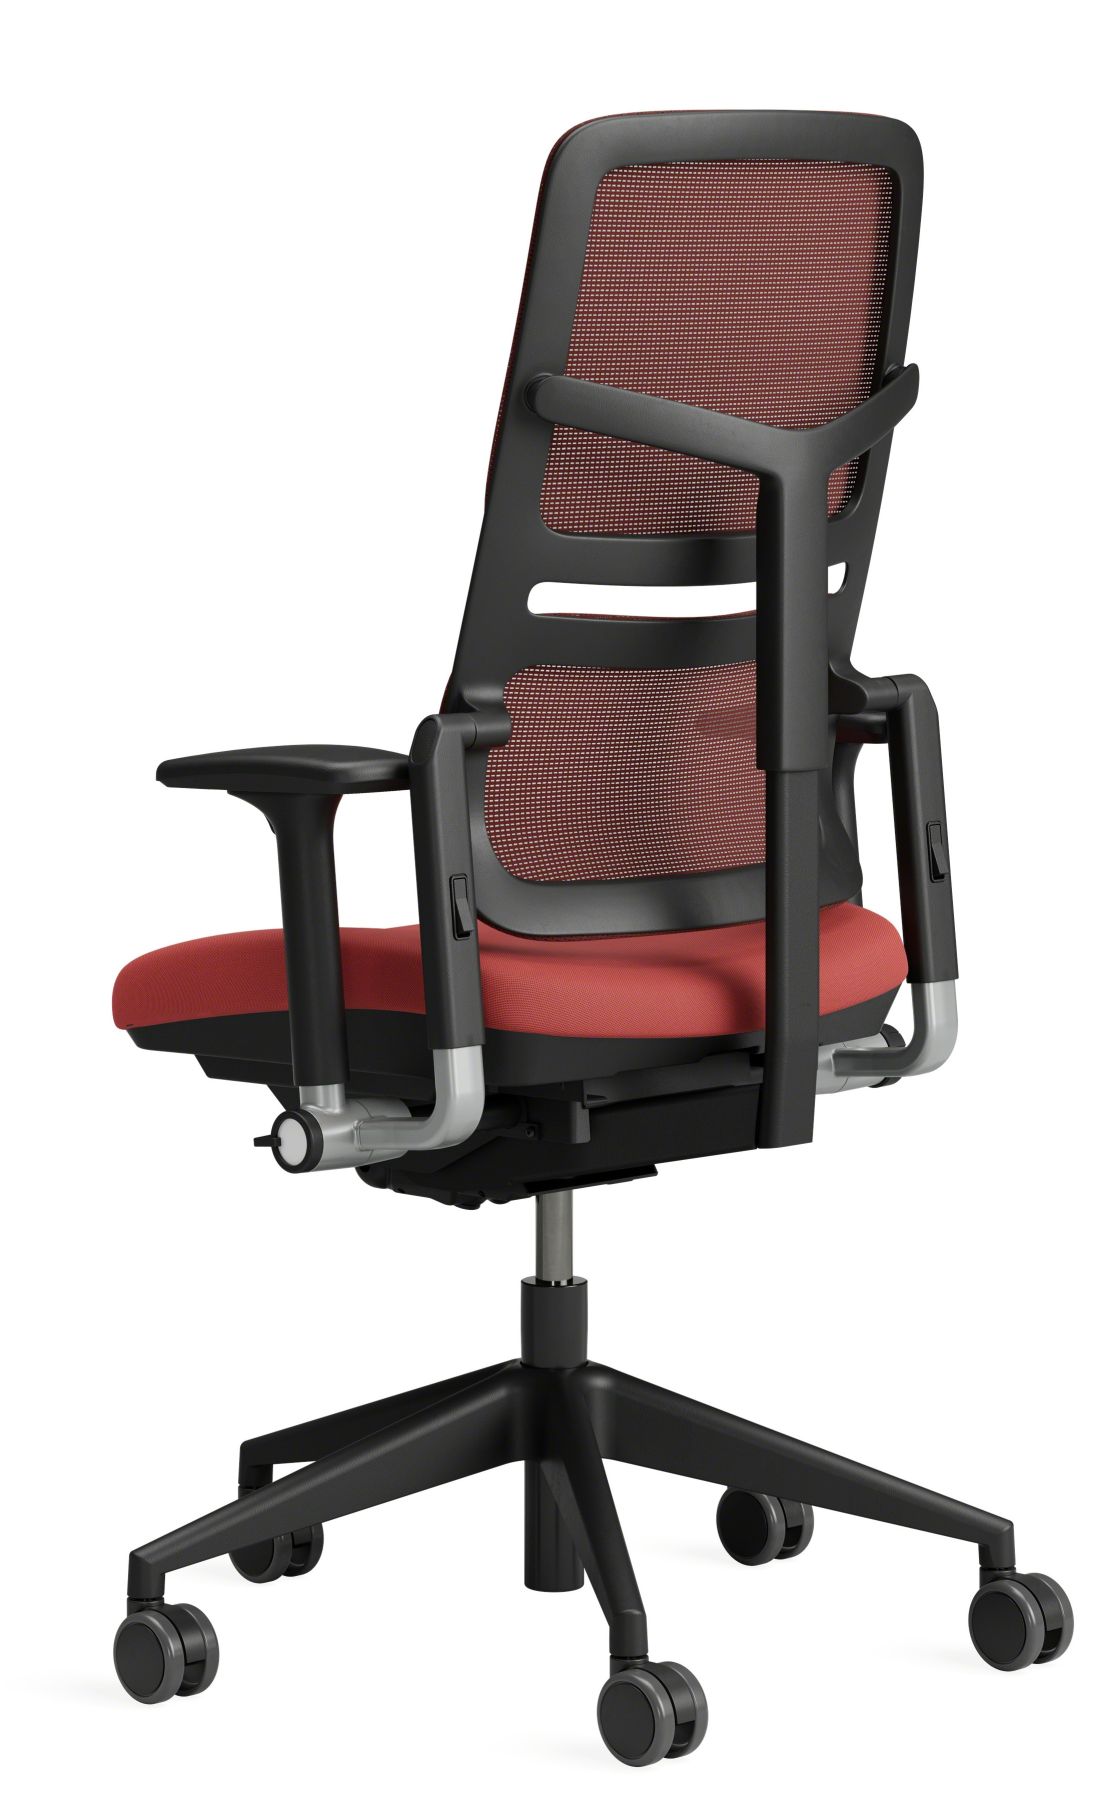 Please Air task chair with mesh back Steelcase 